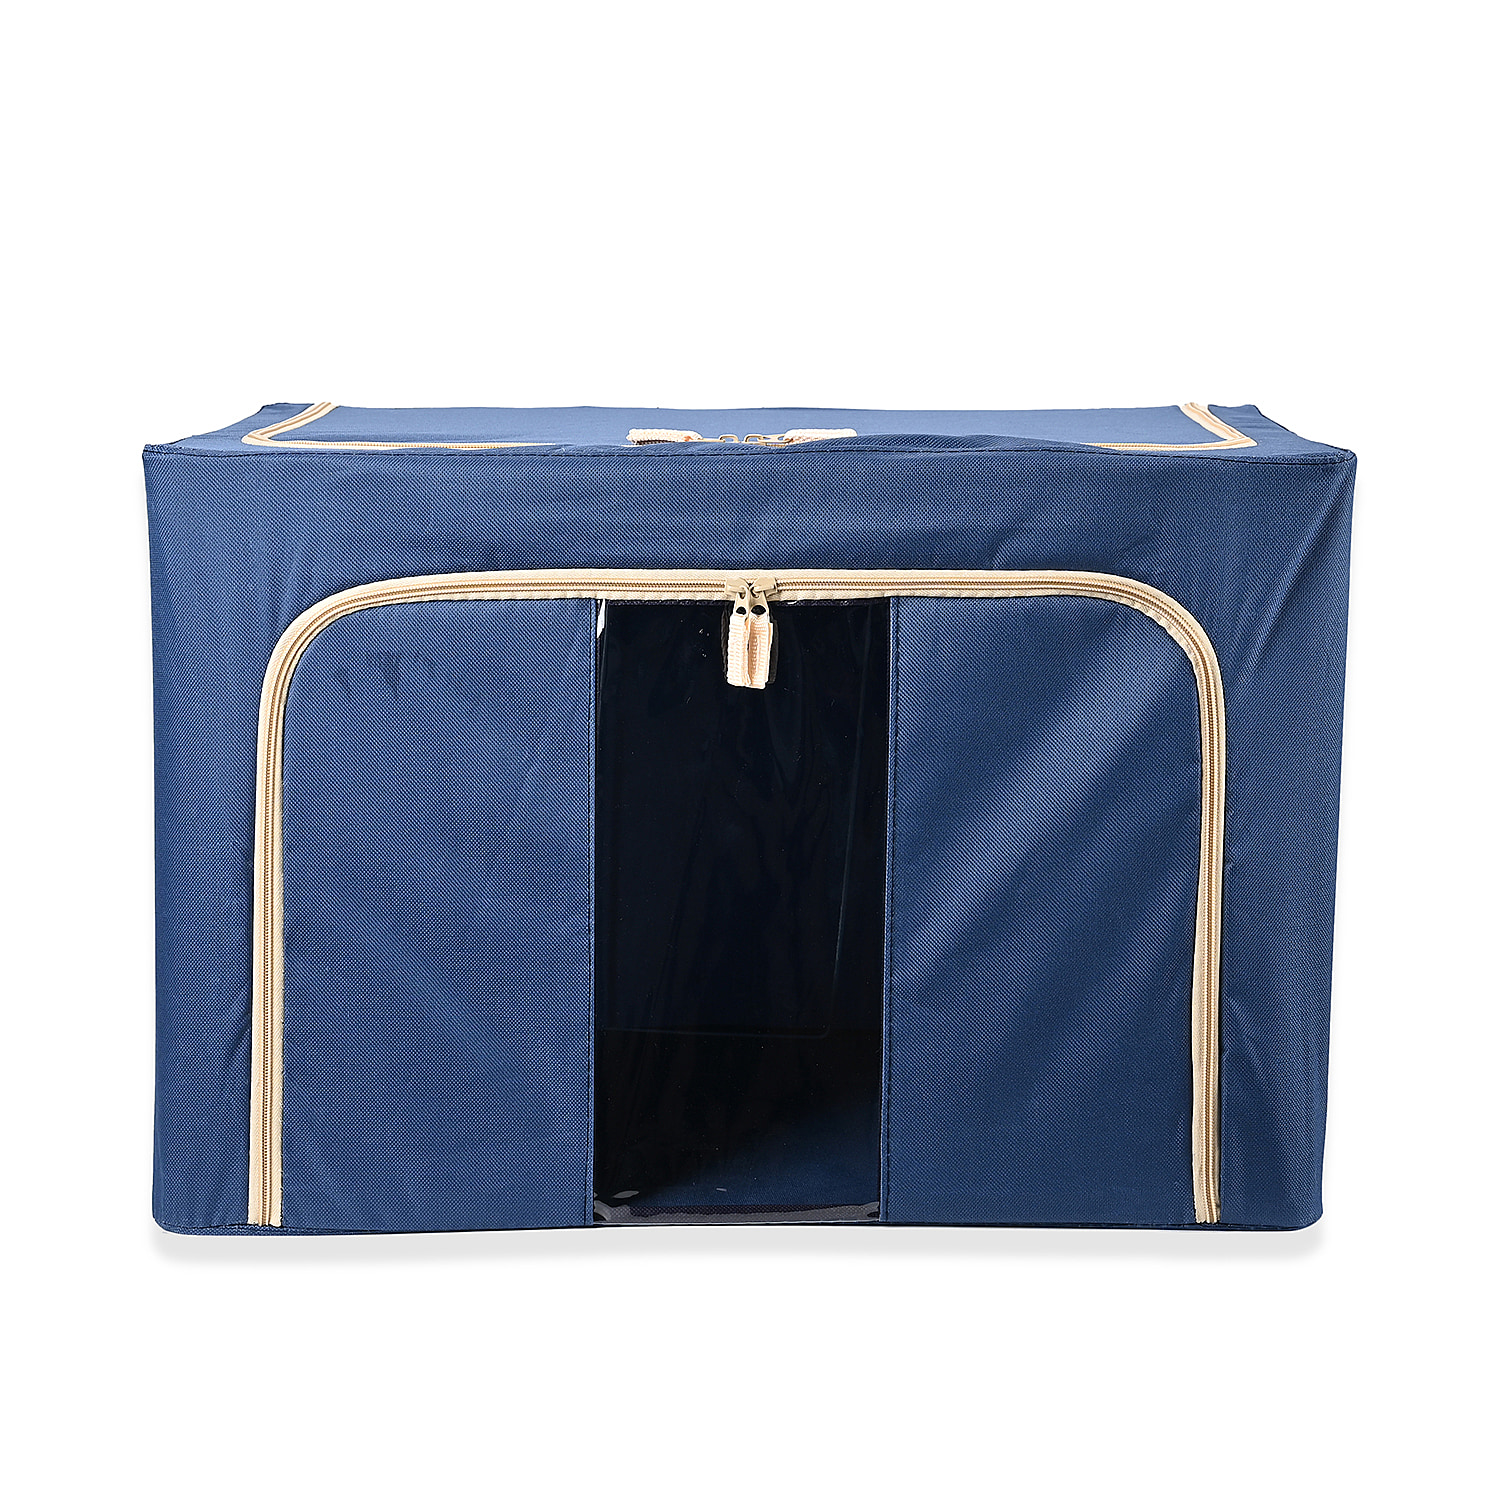 Spring Clean: Super Tidy Storage Box with Metal Frame - Navy